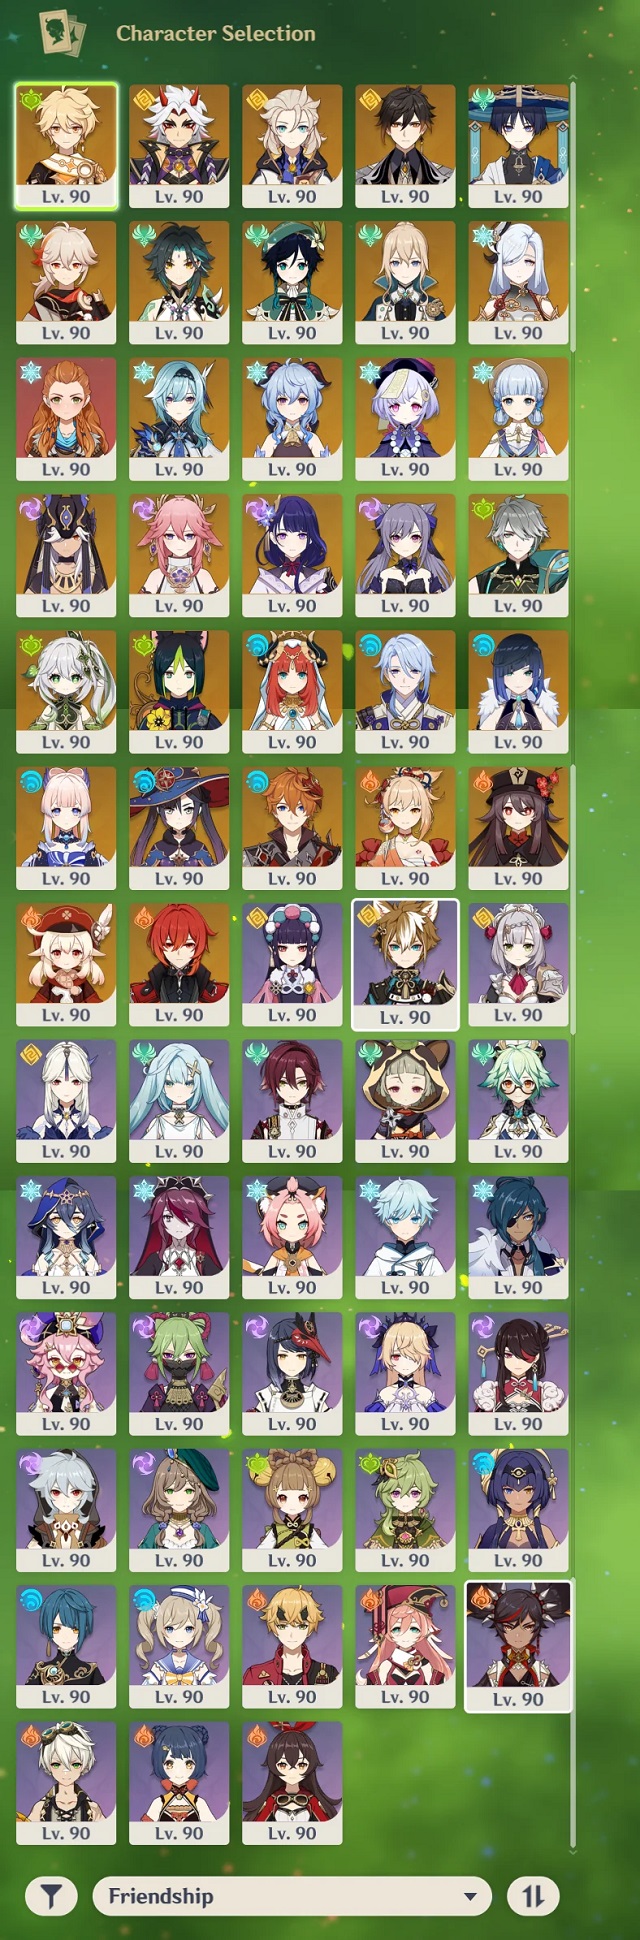 All characters are collected by users and upgraded to level 90